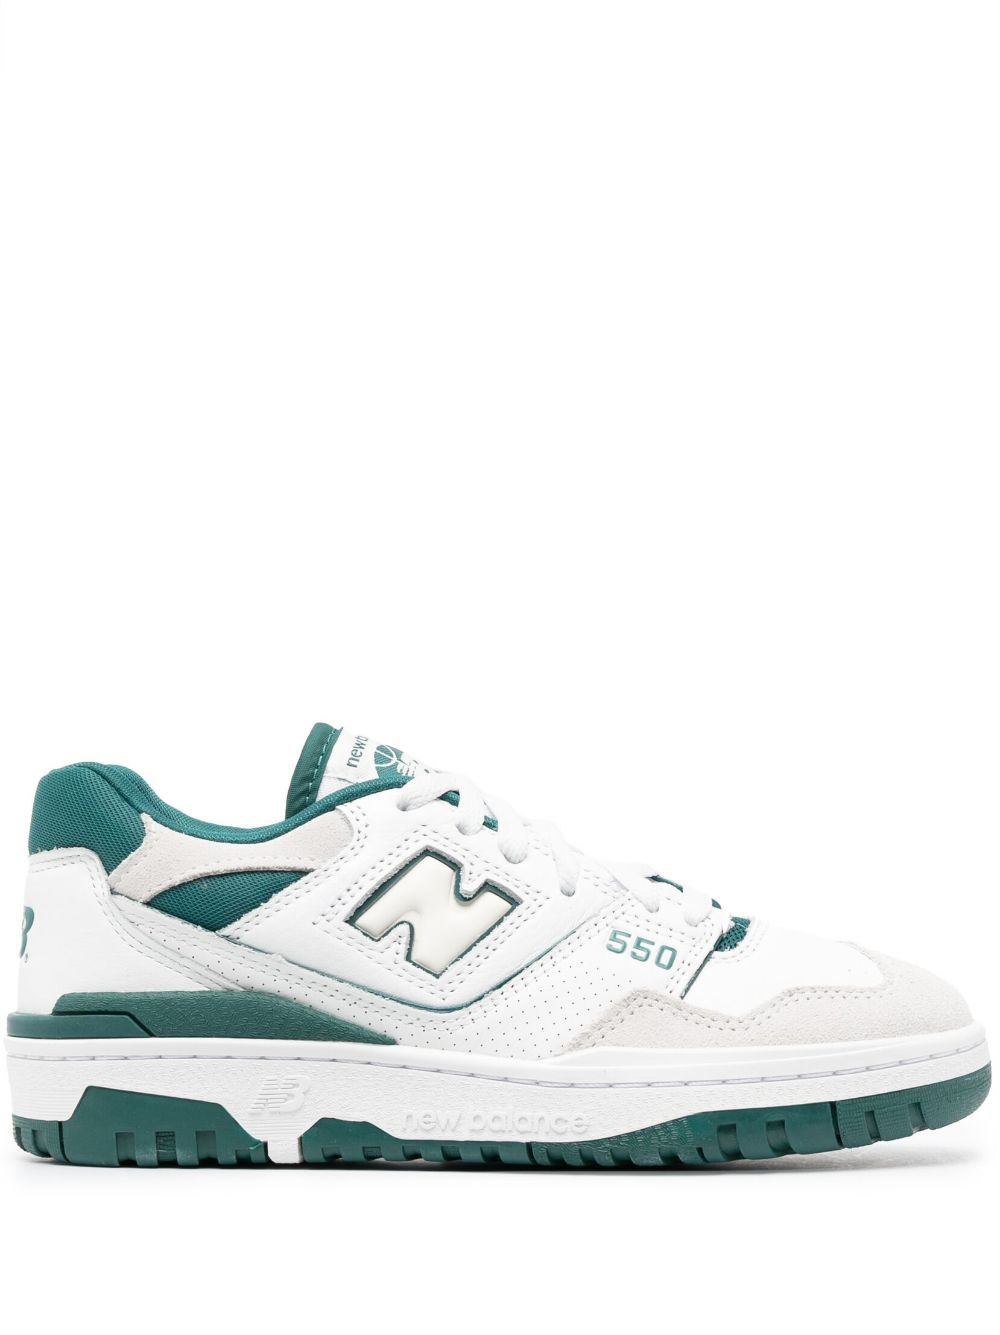 Shop New Balance 550  Lifestyle Sneakers